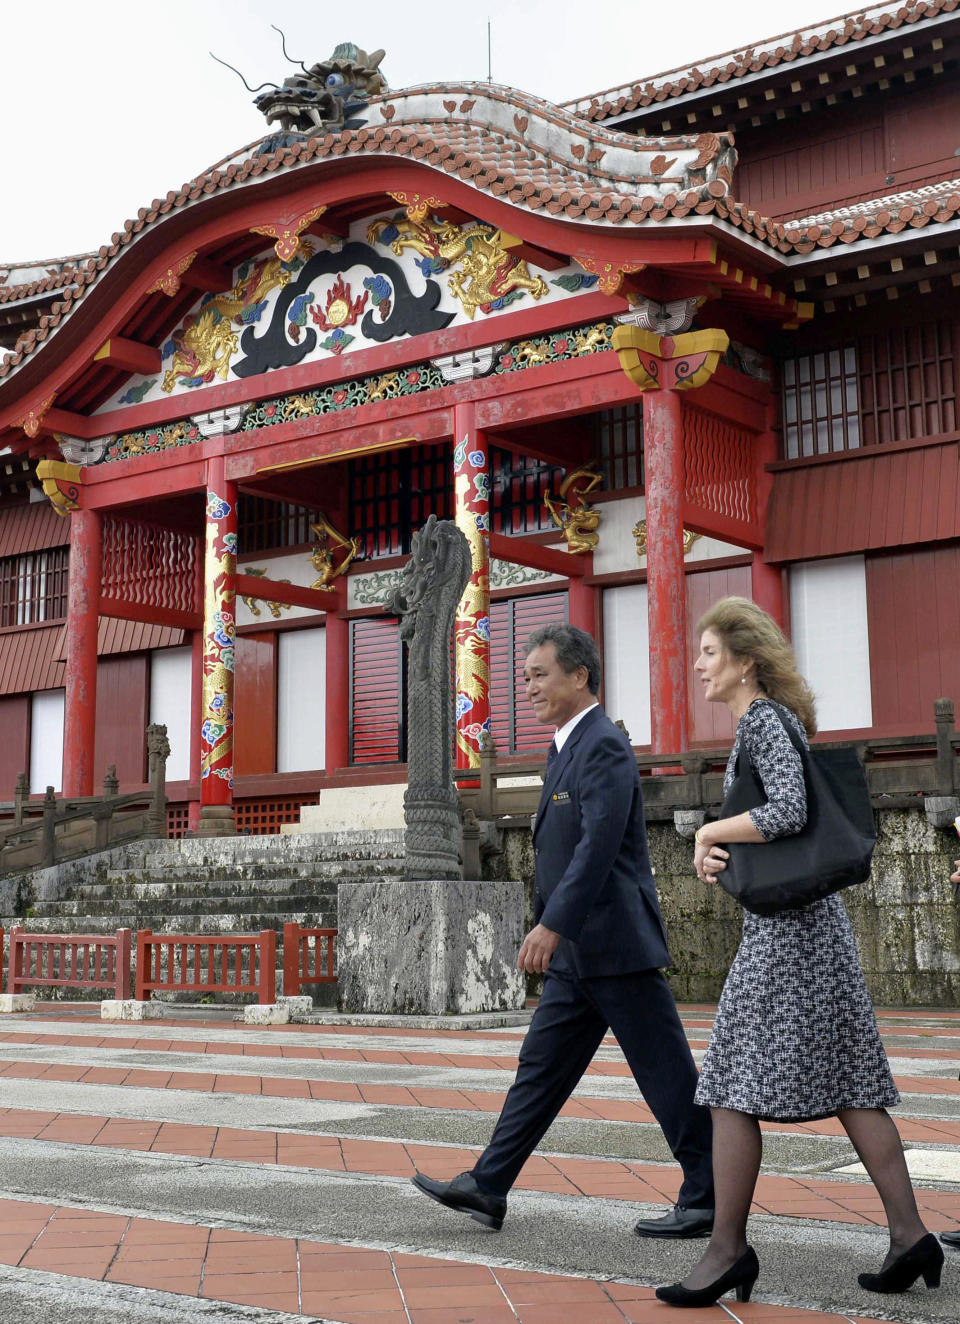 U.S. Ambassador to Japan Caroline Kennedy, right, visits Shuri castle in Naha, Okinawa Wednesday, Feb. 12, 2014. Kennedy has made her first visit to the southernmost island of Okinawa, hoping to get support for a controversial plan to relocate a U.S. military base. (AP Photo/Kyodo News) JAPAN OUT, MANDATORY CREDIT